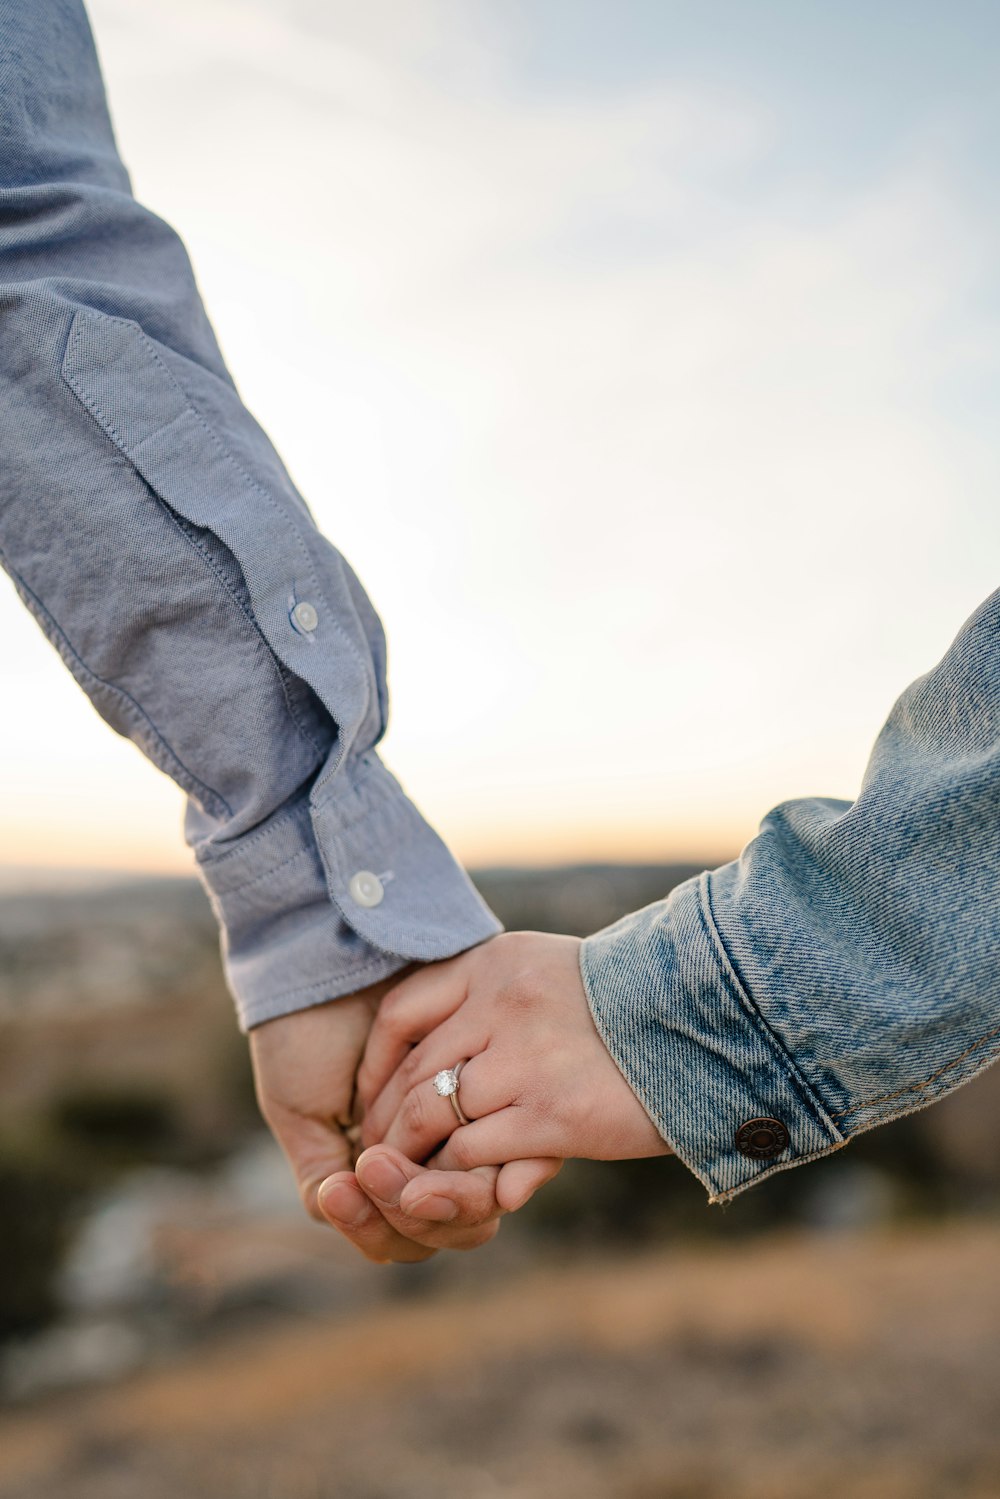 100 Couple Holding Hands Pictures Download Free Images On Unsplash